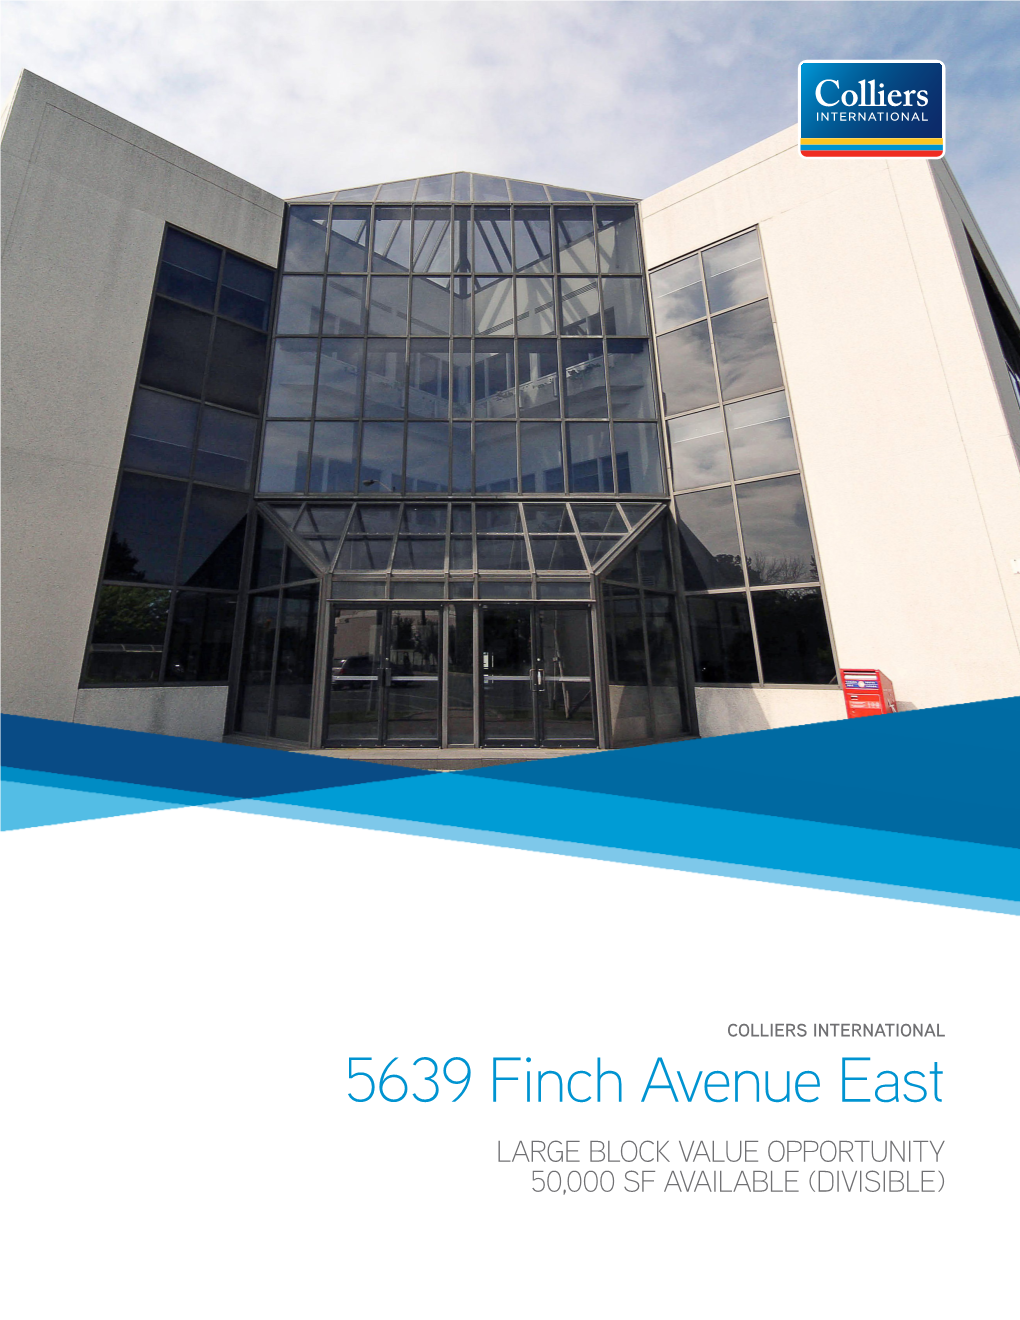 5639 Finch Avenue East LARGE BLOCK VALUE OPPORTUNITY 50,000 SF AVAILABLE (DIVISIBLE) LARGE BLOCK SPACE AVAILABLE